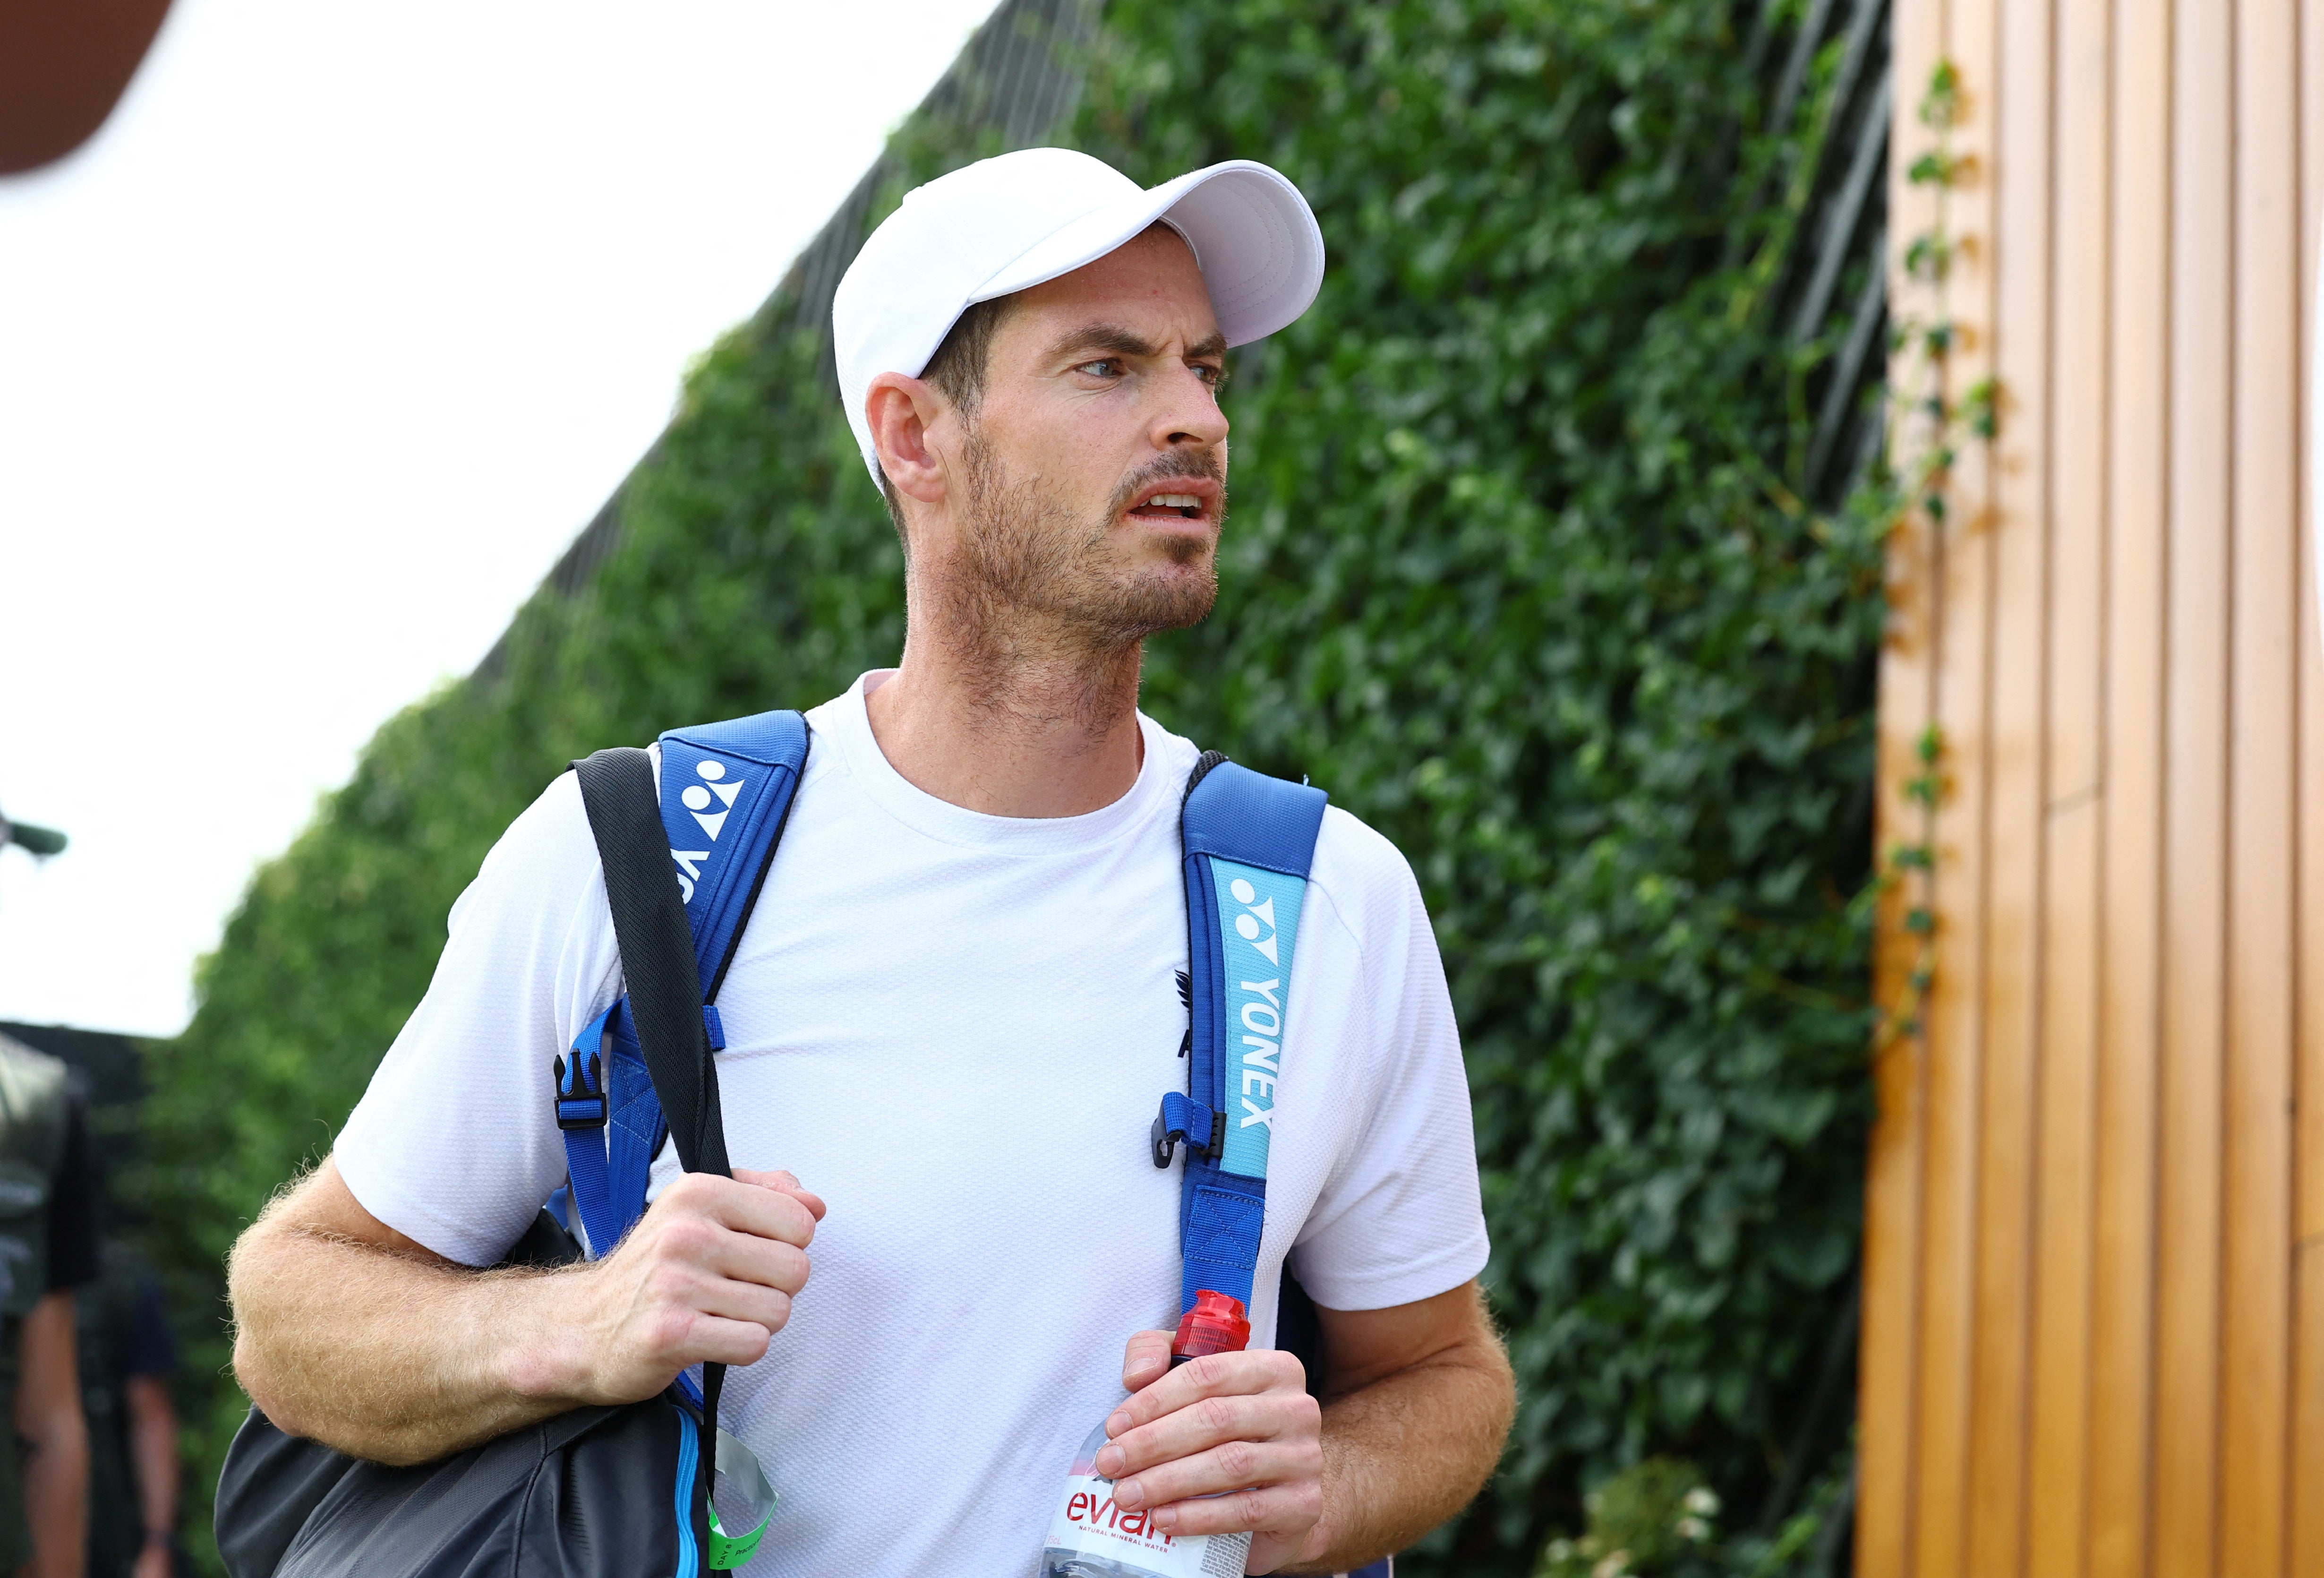 Murray is hoping for ‘closure’ at Wimbledon